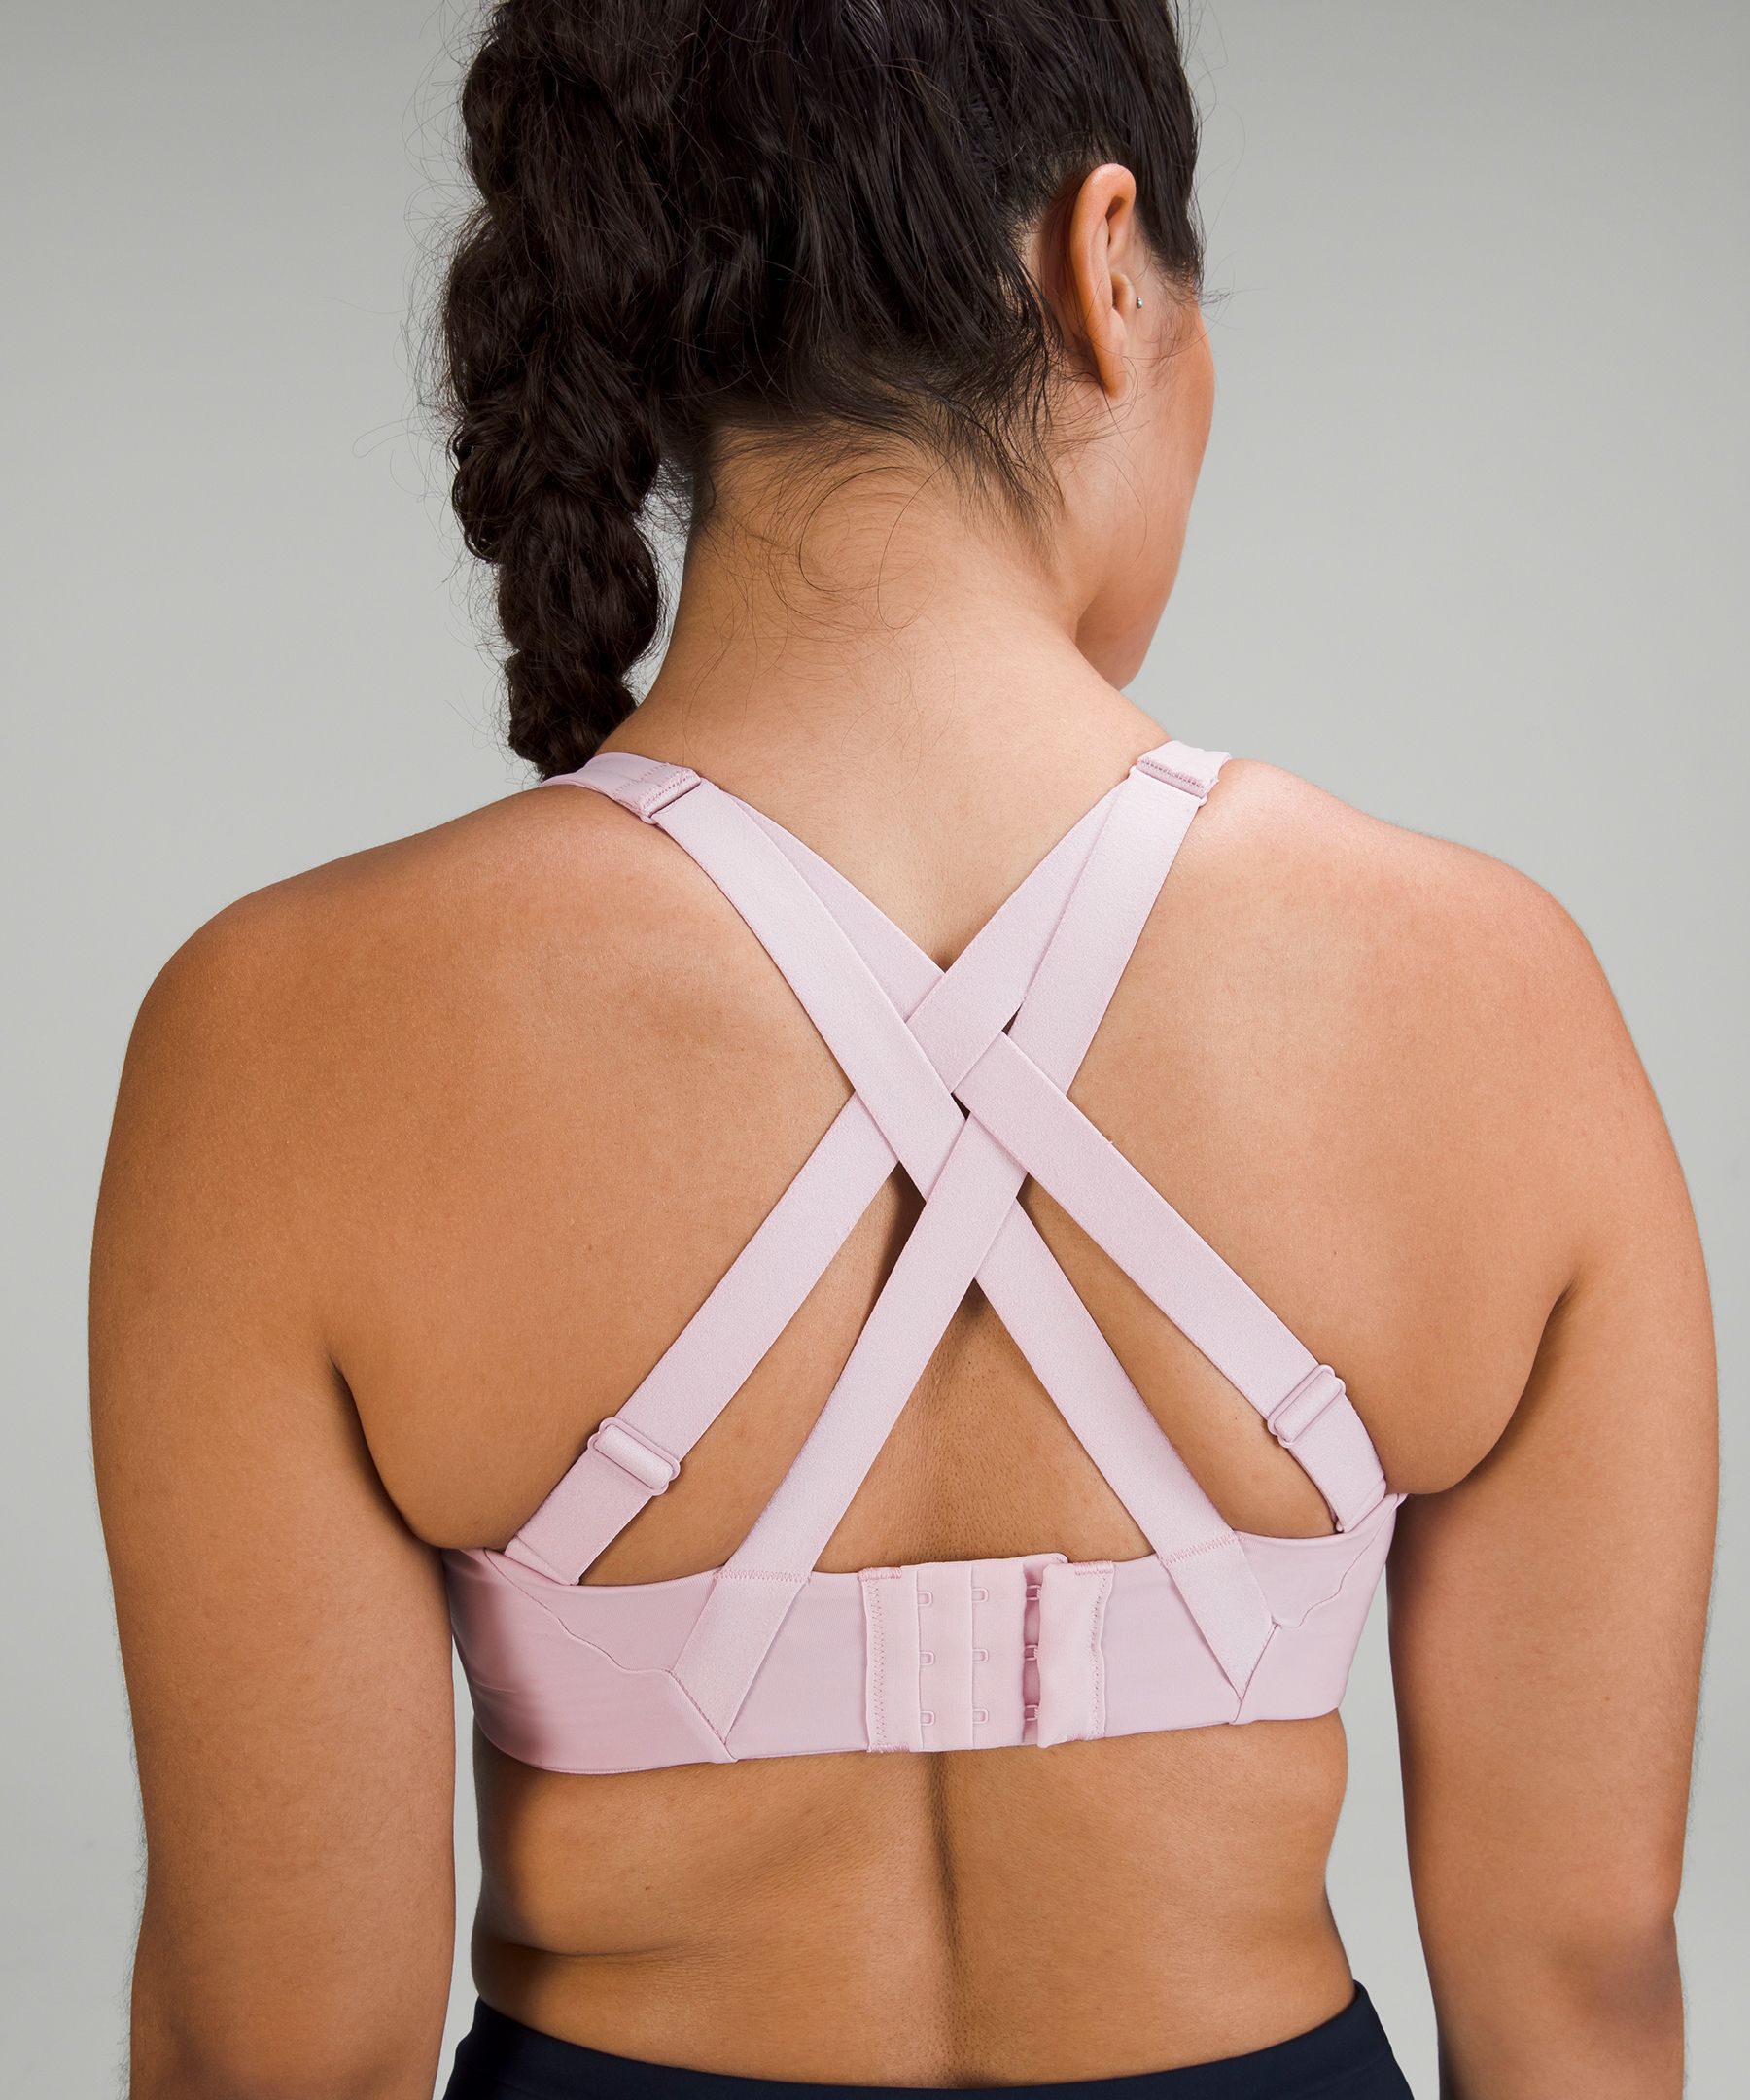 lululemon - The best of both worlds—coverage for a B/C cup in the front and  beautiful strappy back detailing for full range of movement. Choose the Energy  Bra for a distraction-free practice